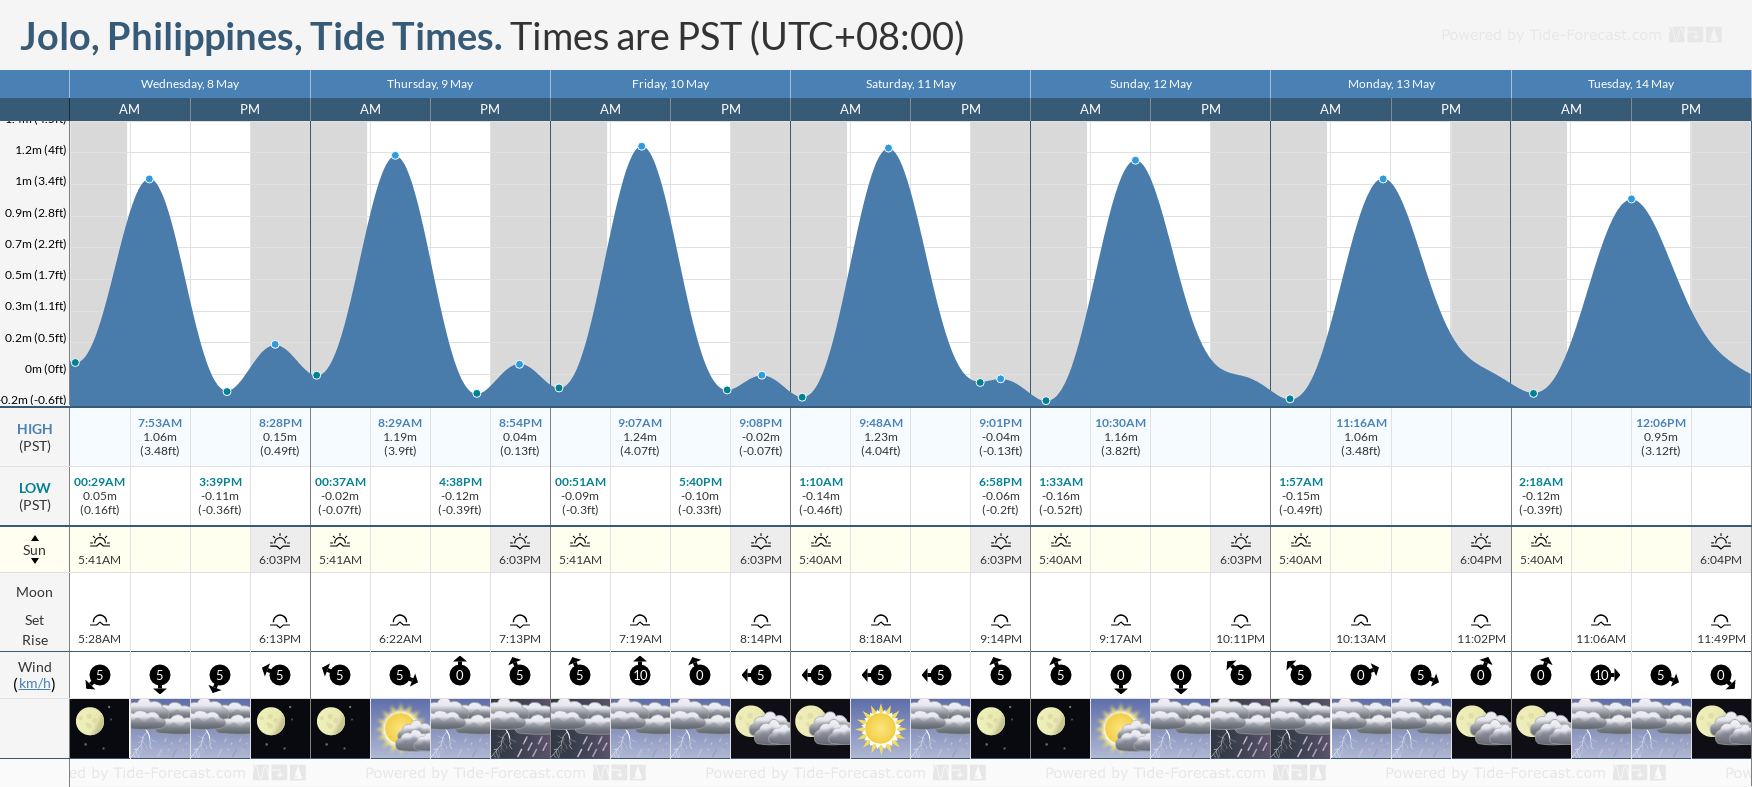 Jolo, Philippines Tide Chart including high and low tide times for the next 7 days